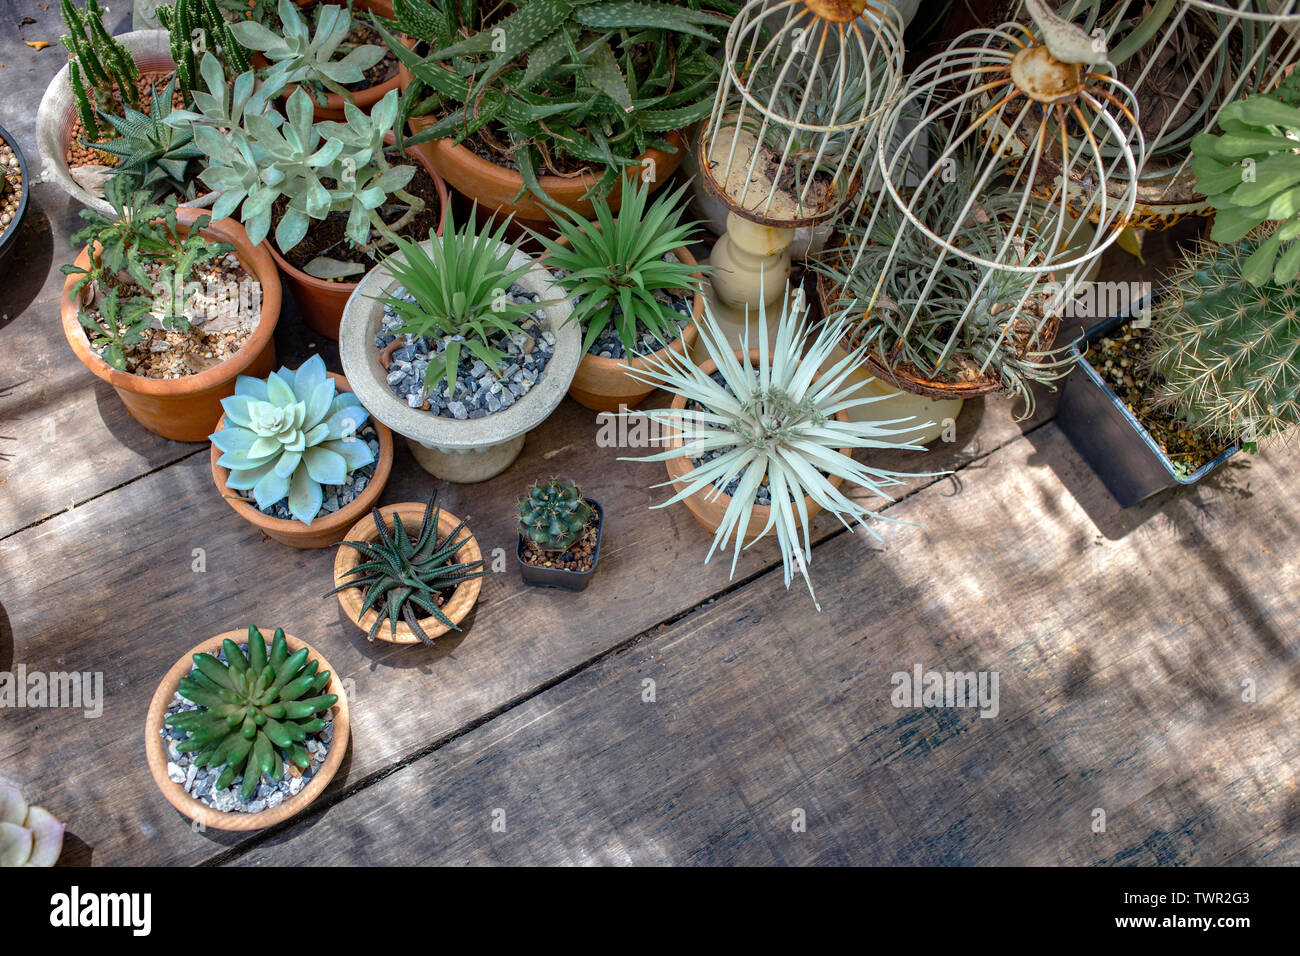 cactus decoration outdoor garden wood table from top view . hobby activities concept Stock Photo